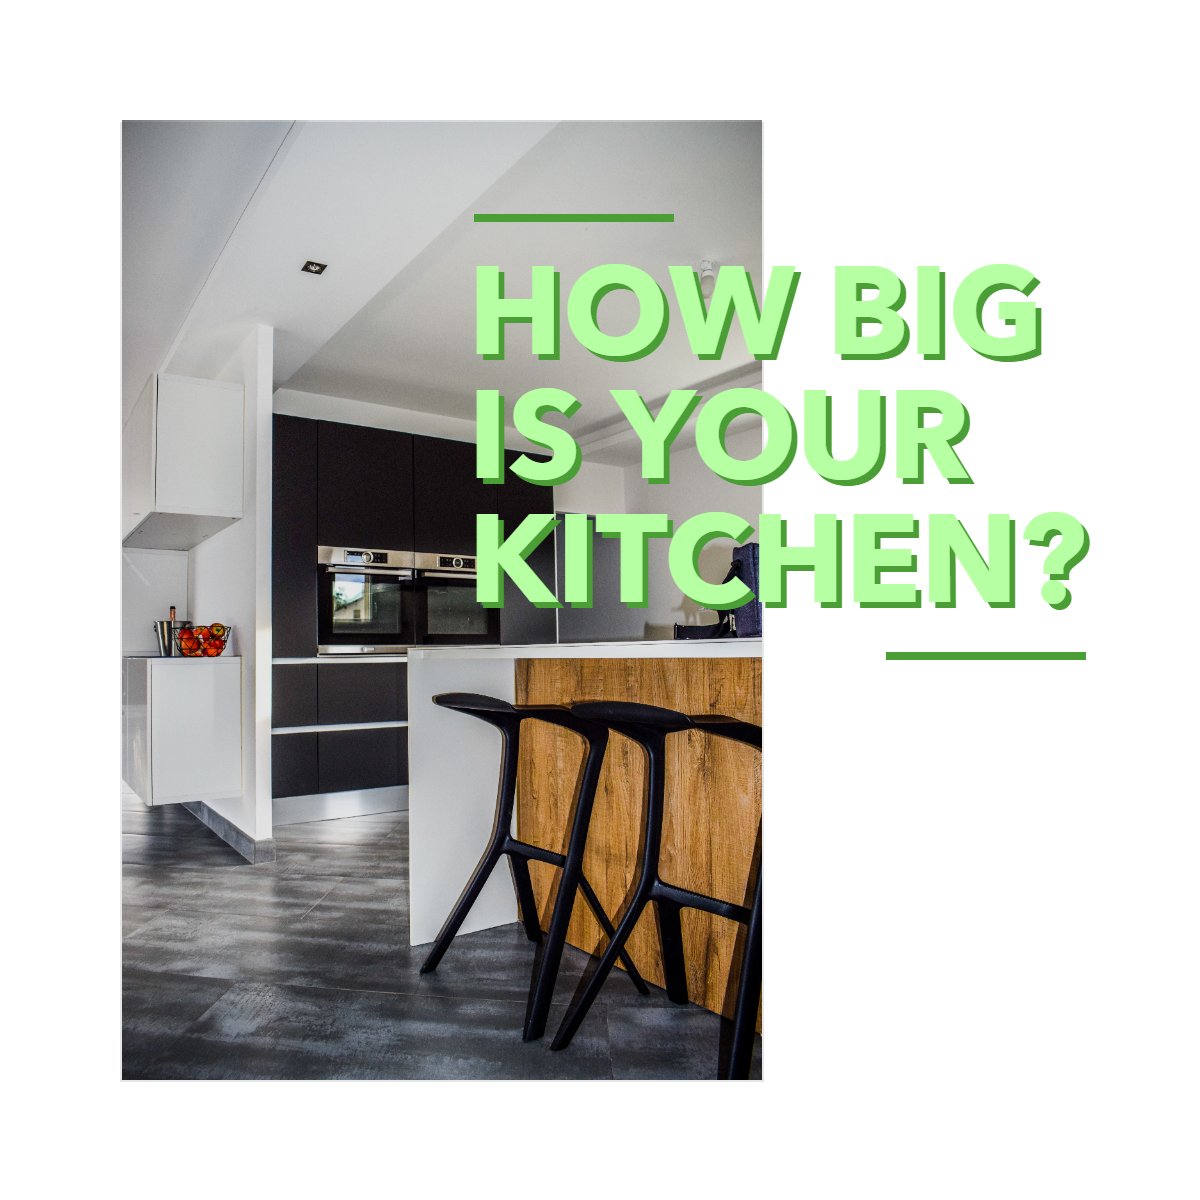 In the US the average kitchen size for single homes is 161 square feet.

How big is your kitchen Tell us in the comments!  👇

#realestate #kitchensize #kitchen #homes
 #AppletonWisconsin #FoxCities #RealEstate #AppletonRealEstate